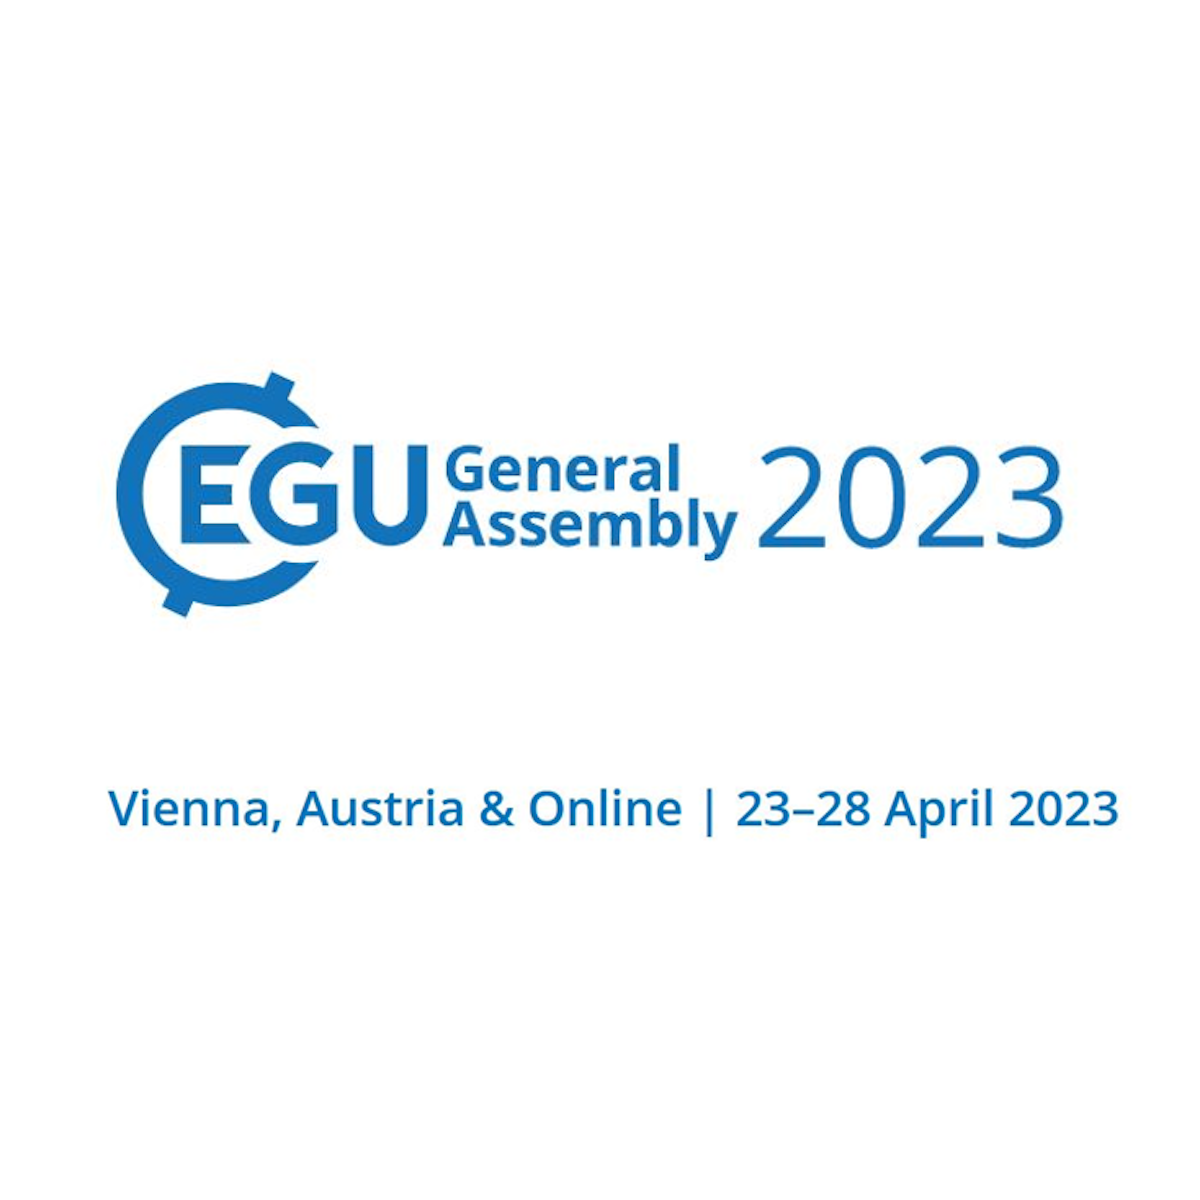 EGU CONFERENCE 2023 Eurac Research